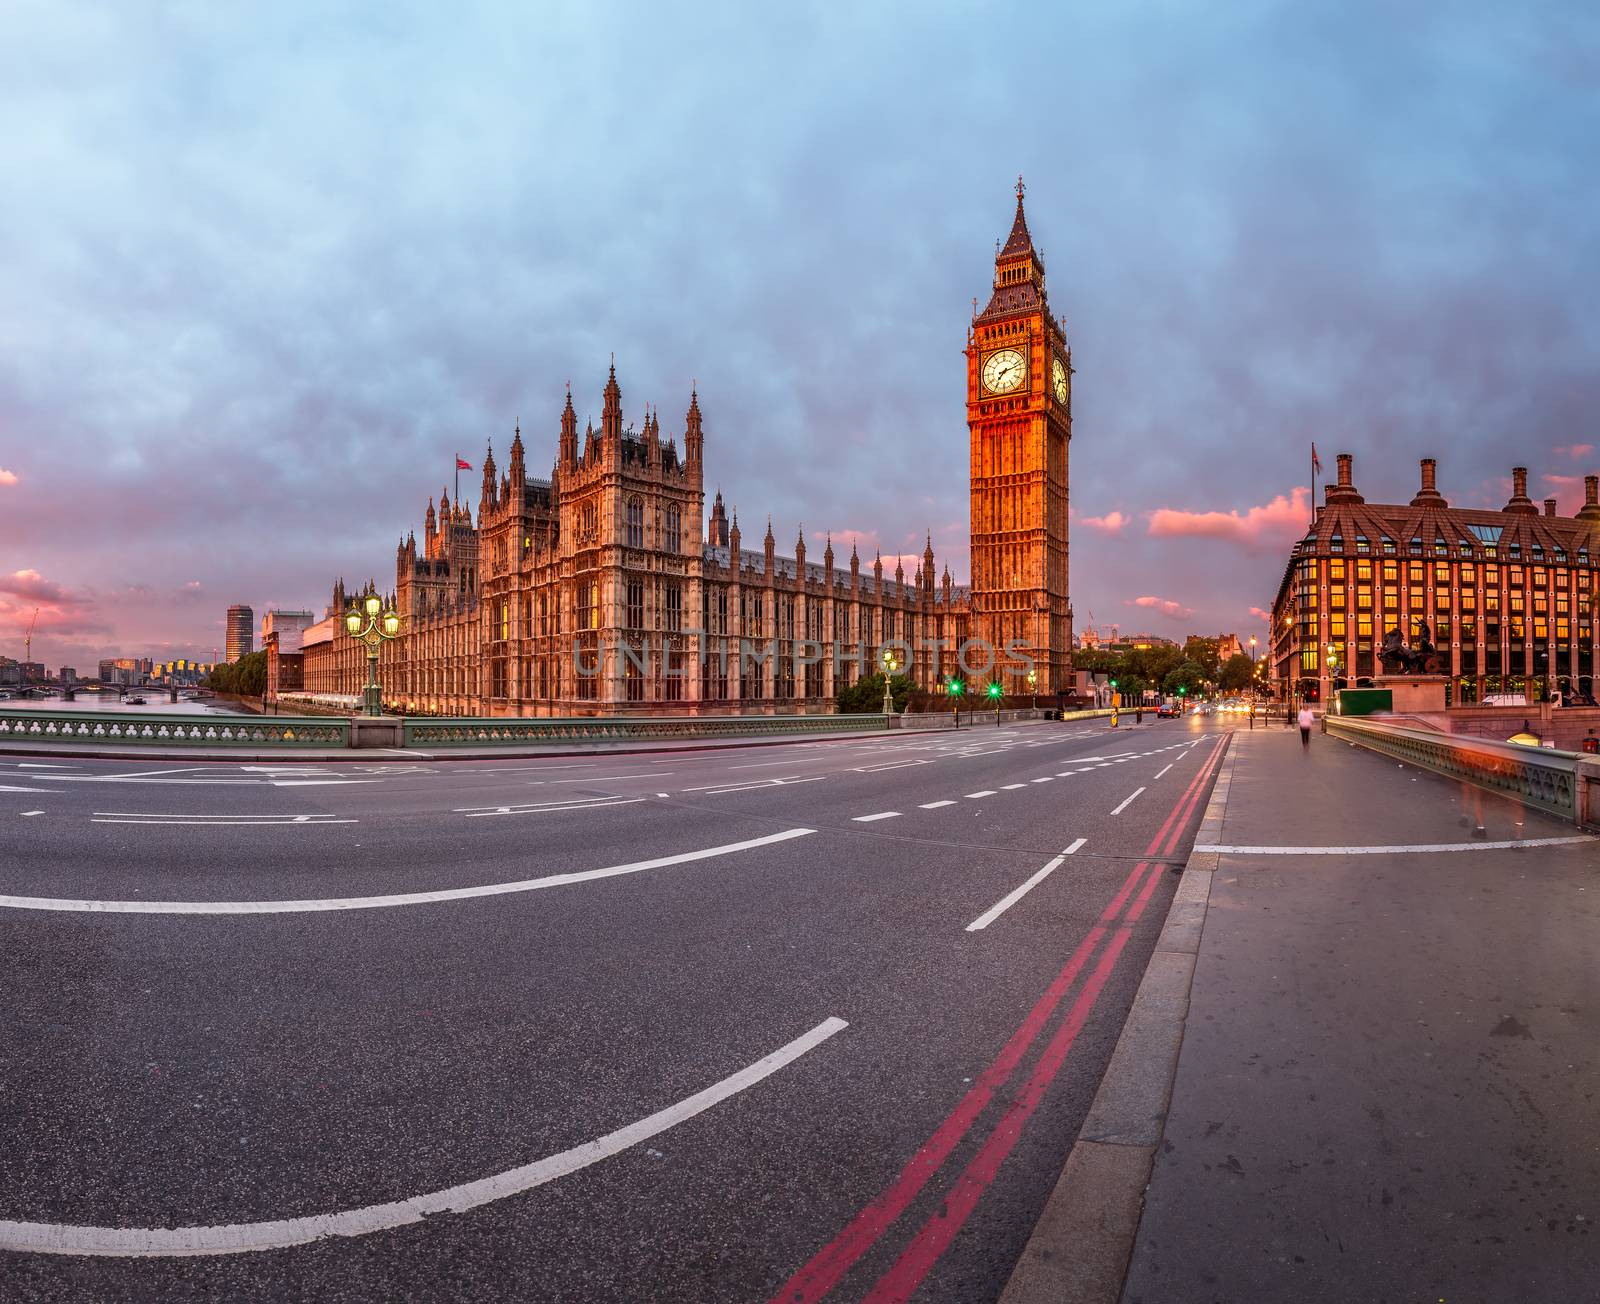 Queen Elizabeth Clock Tower and Westminster Palace in the Morning, London, United Kingdom